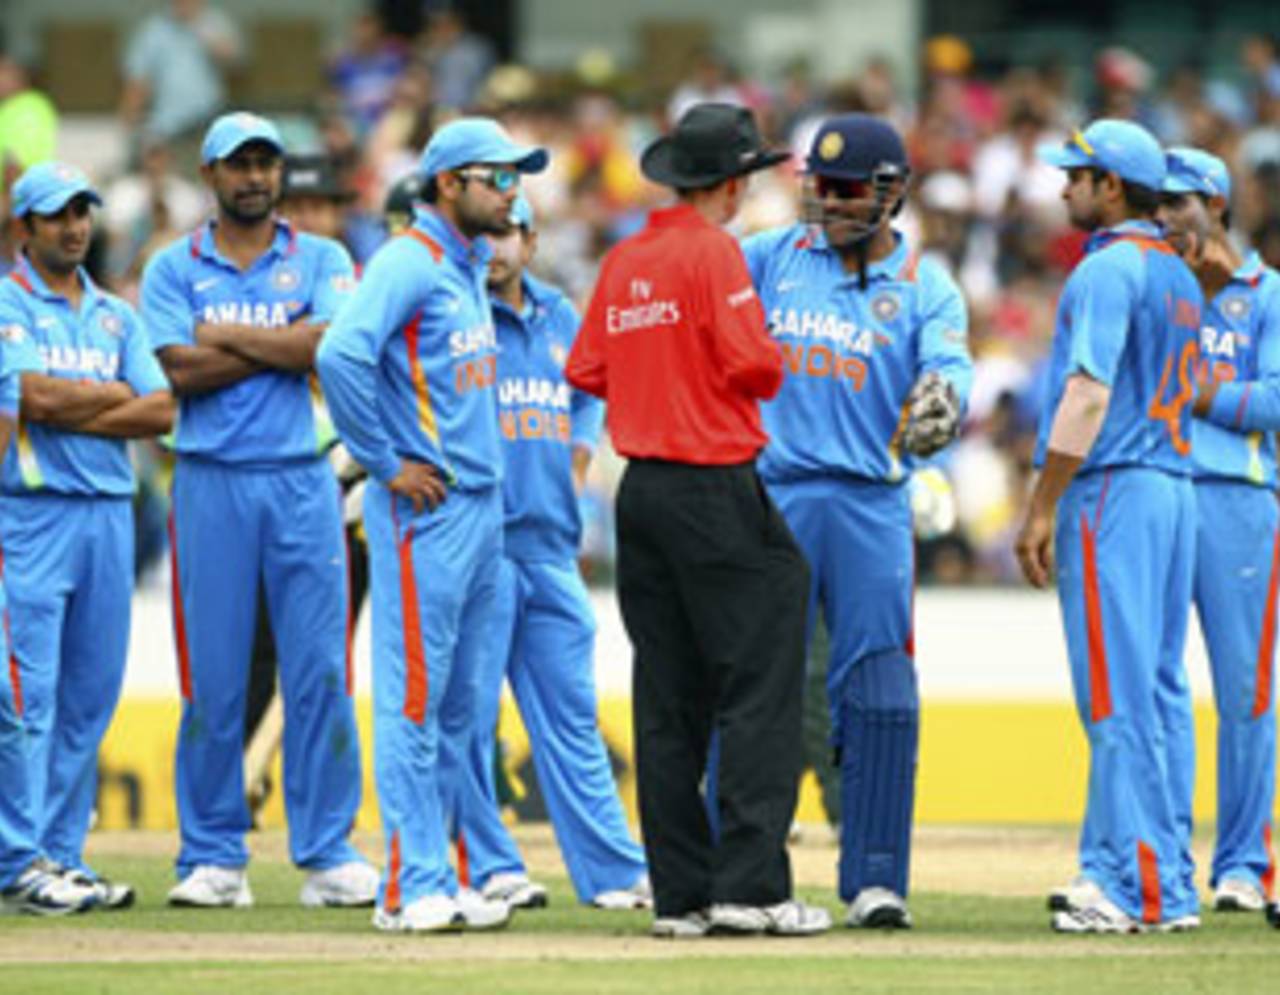 MS Dhoni discusses the appeal for obstructing the field with umpire Billy Bowden, Australia v India, CB Series, Sydney, February 26, 2012